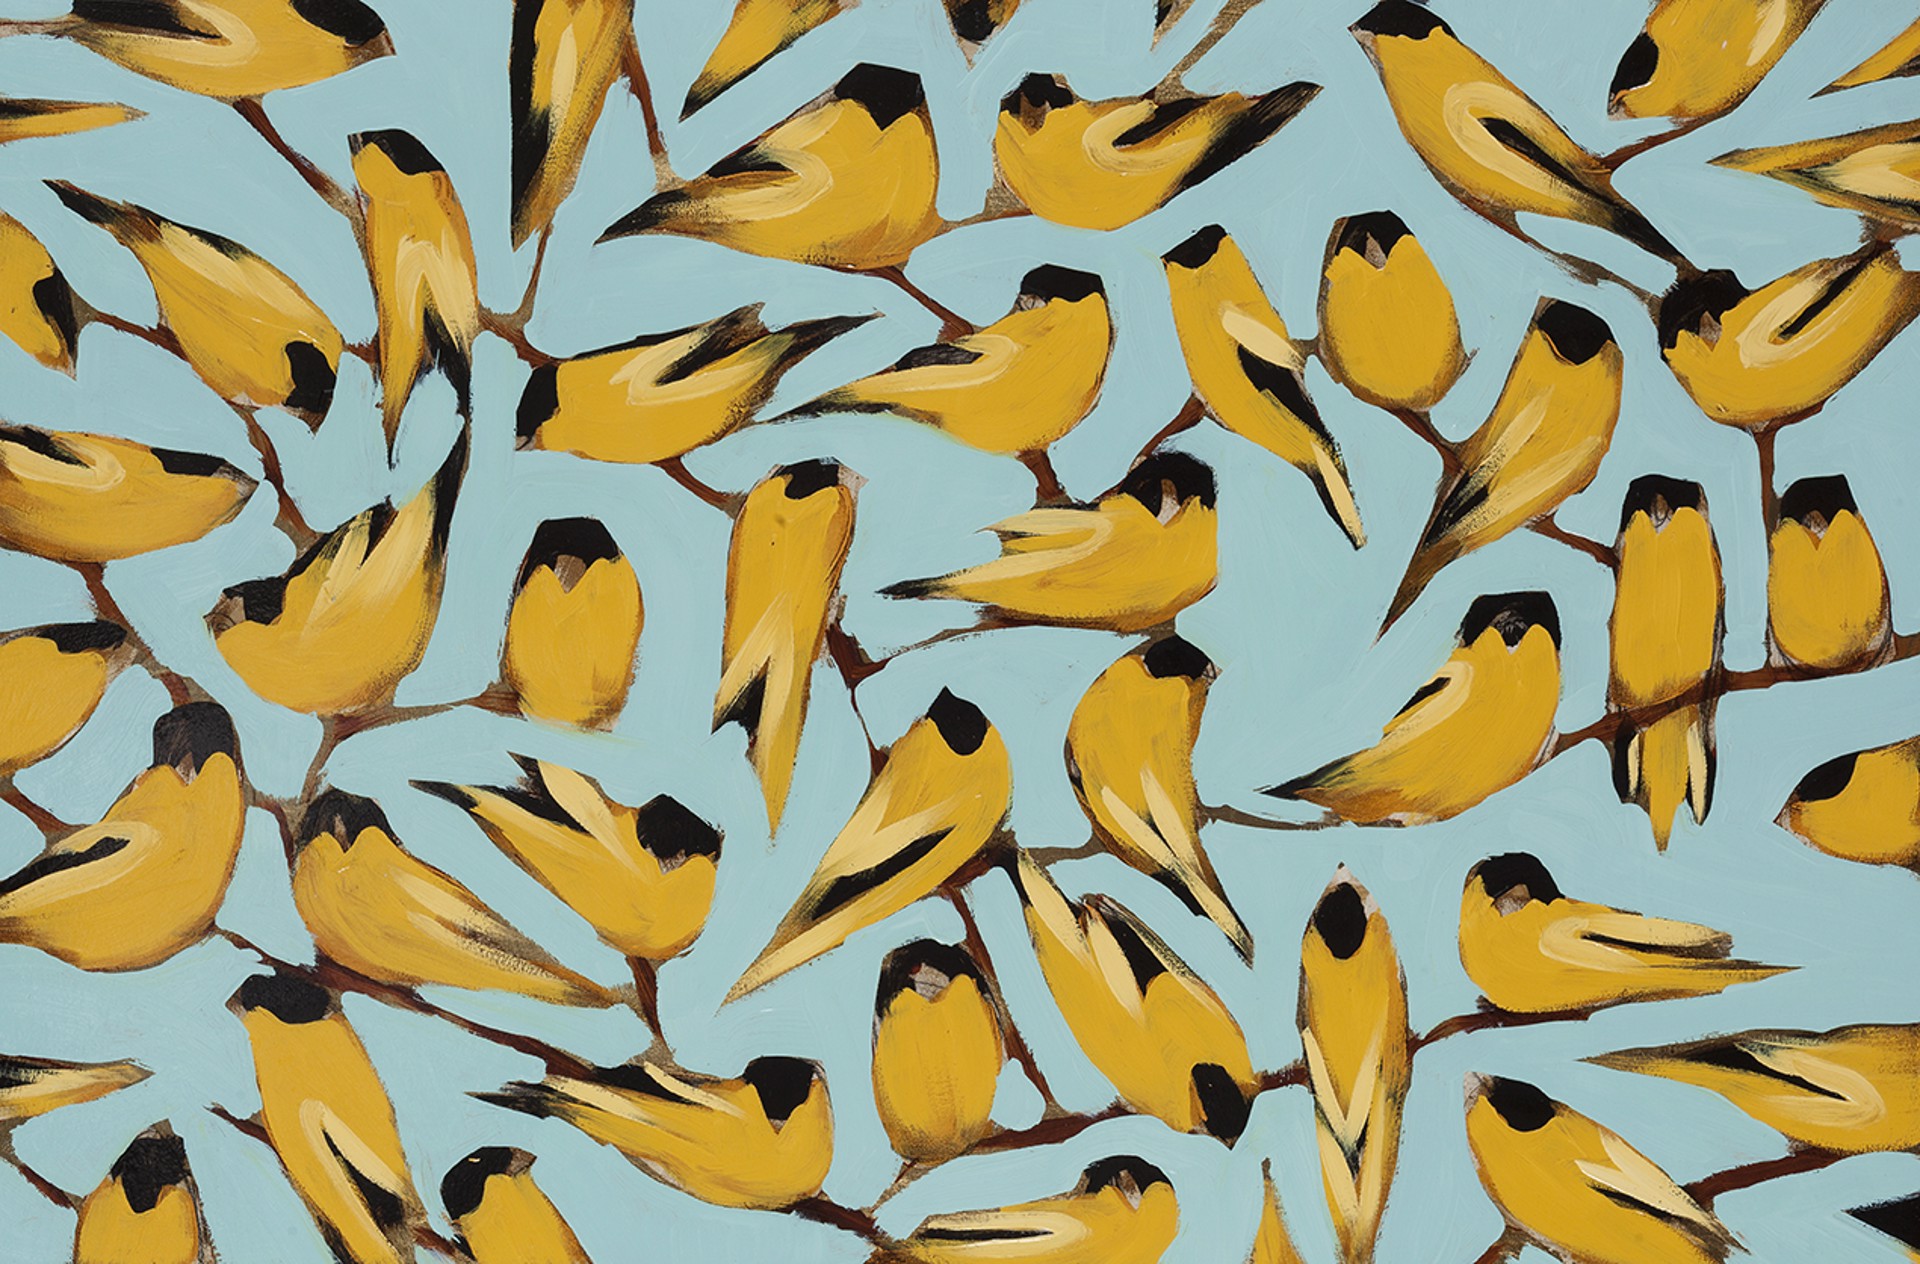 Goldfinches  24x36 Commission similar to photograph for Cathy Stutzman by Joseph Bradley